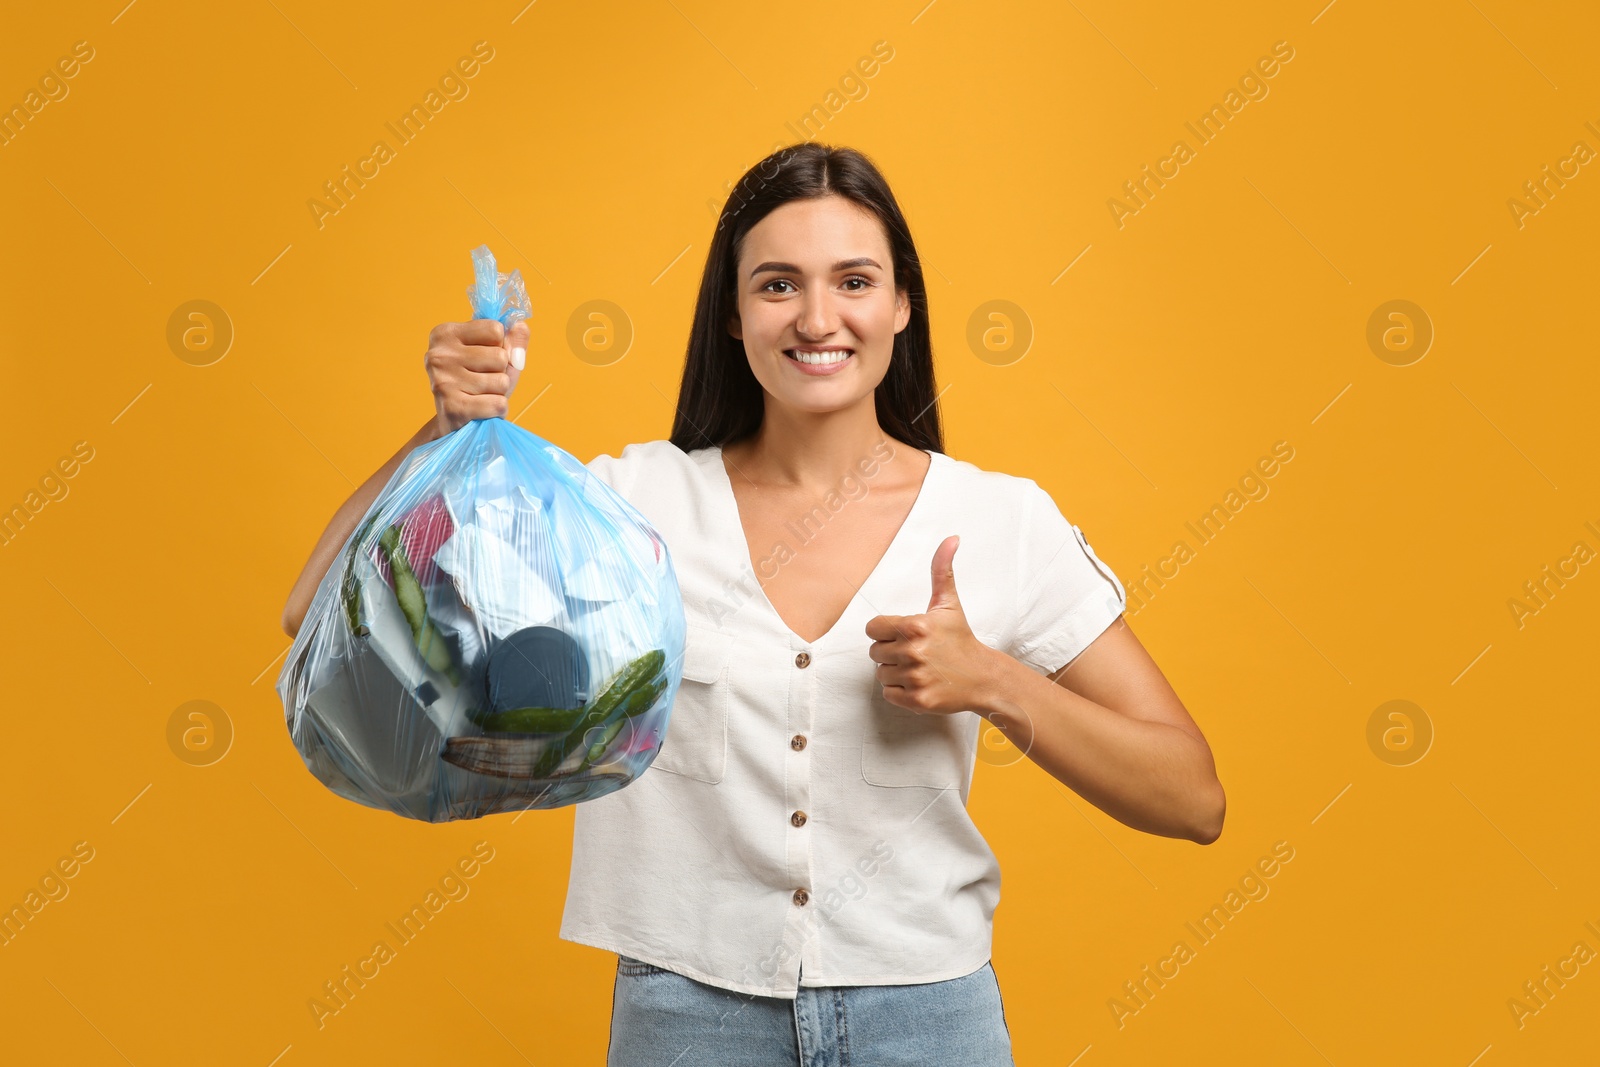 Photo of Woman holding full garbage bag on yellow background